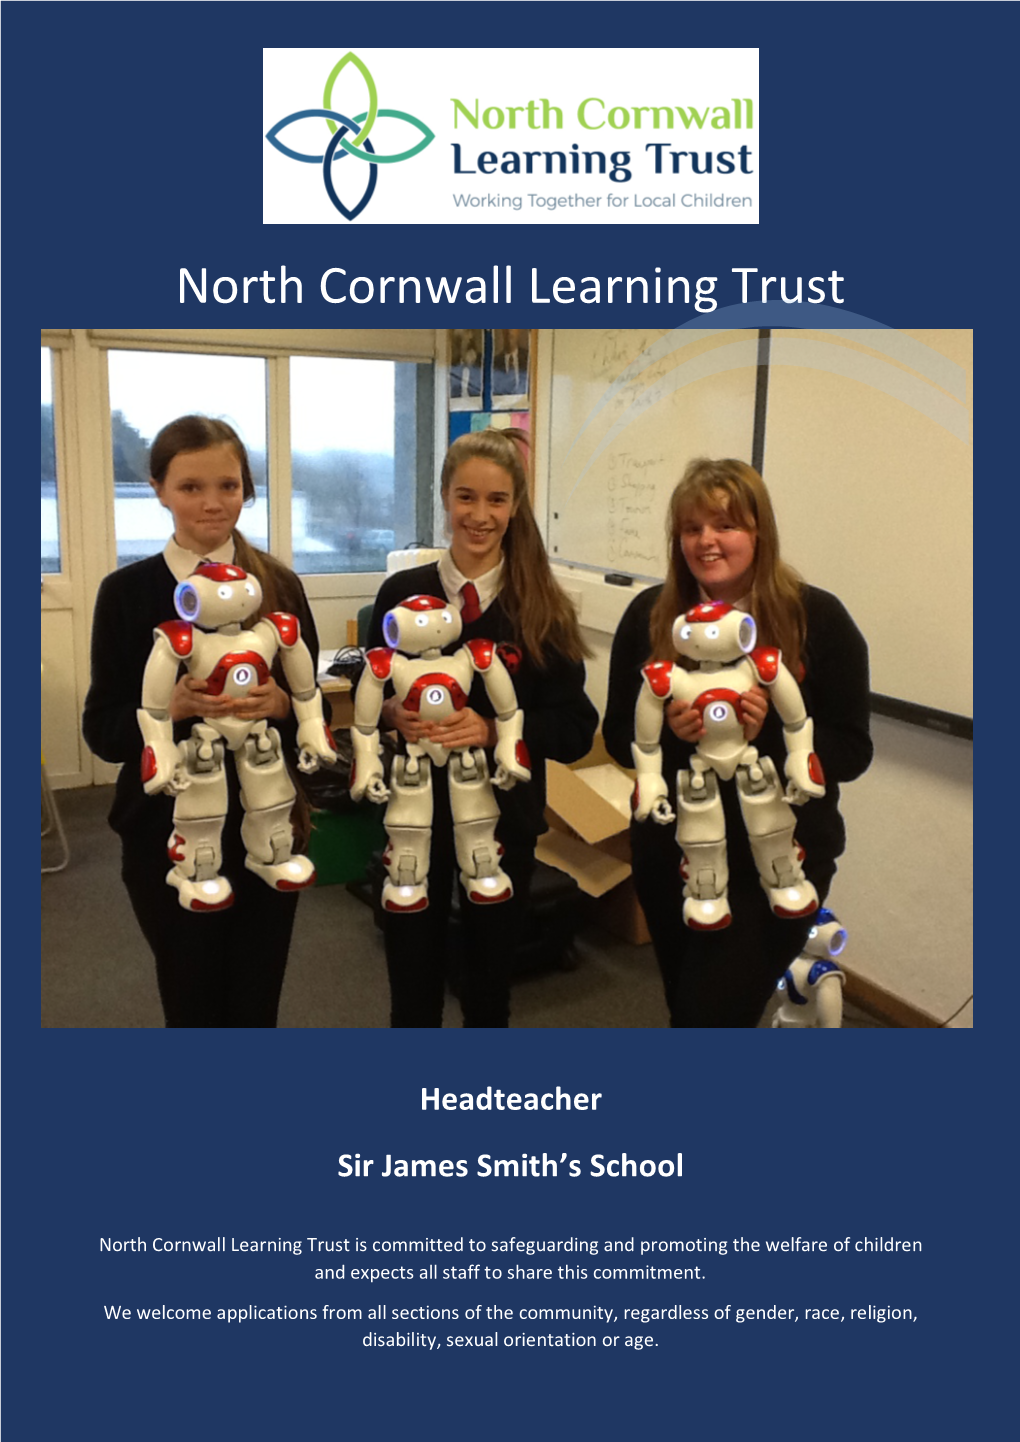 North Cornwall Learning Trust